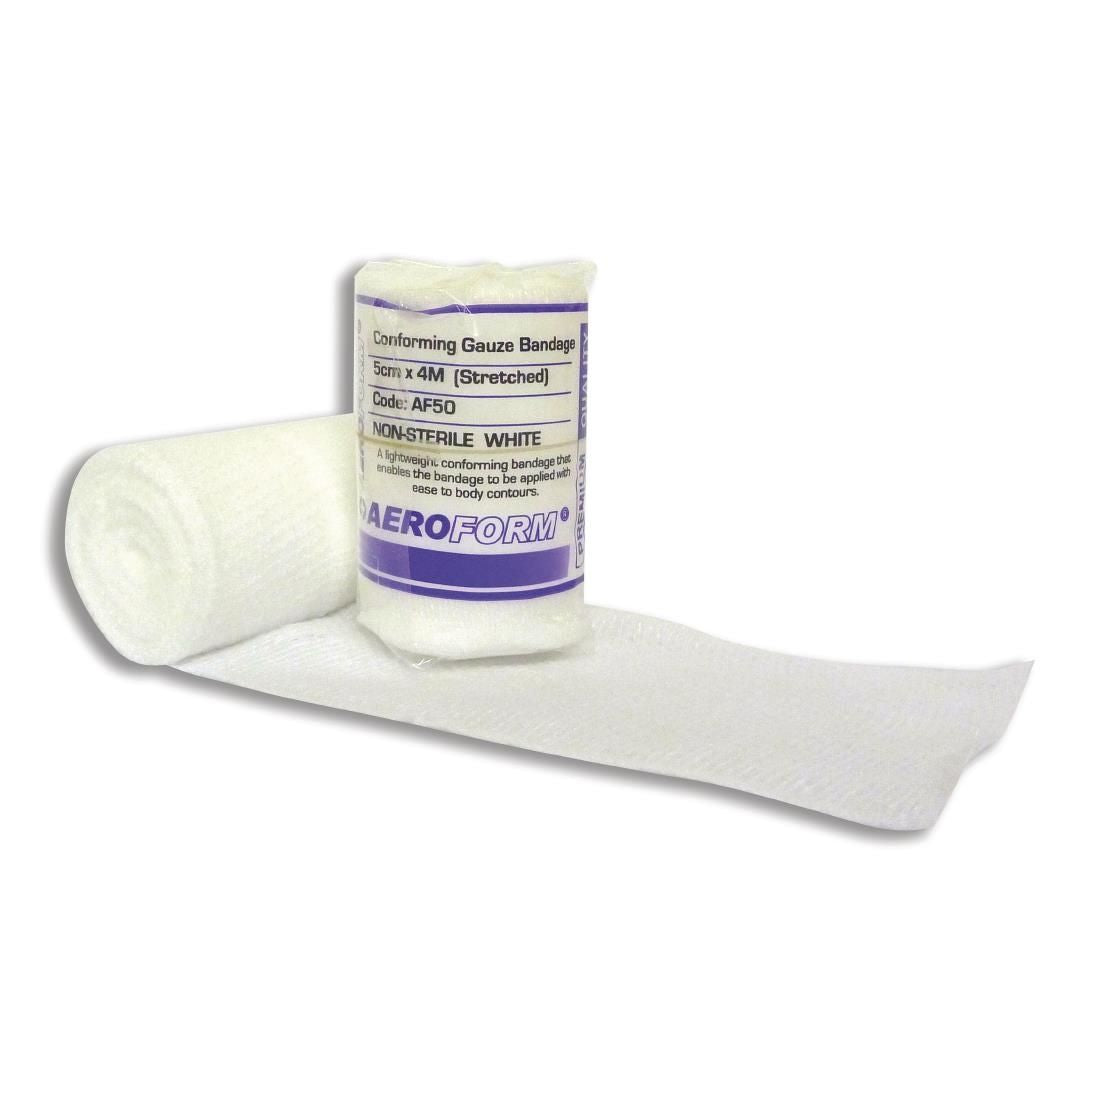 Conforming Bandage 50mm x 4m (Pack of 12) JD Catering Equipment Solutions Ltd